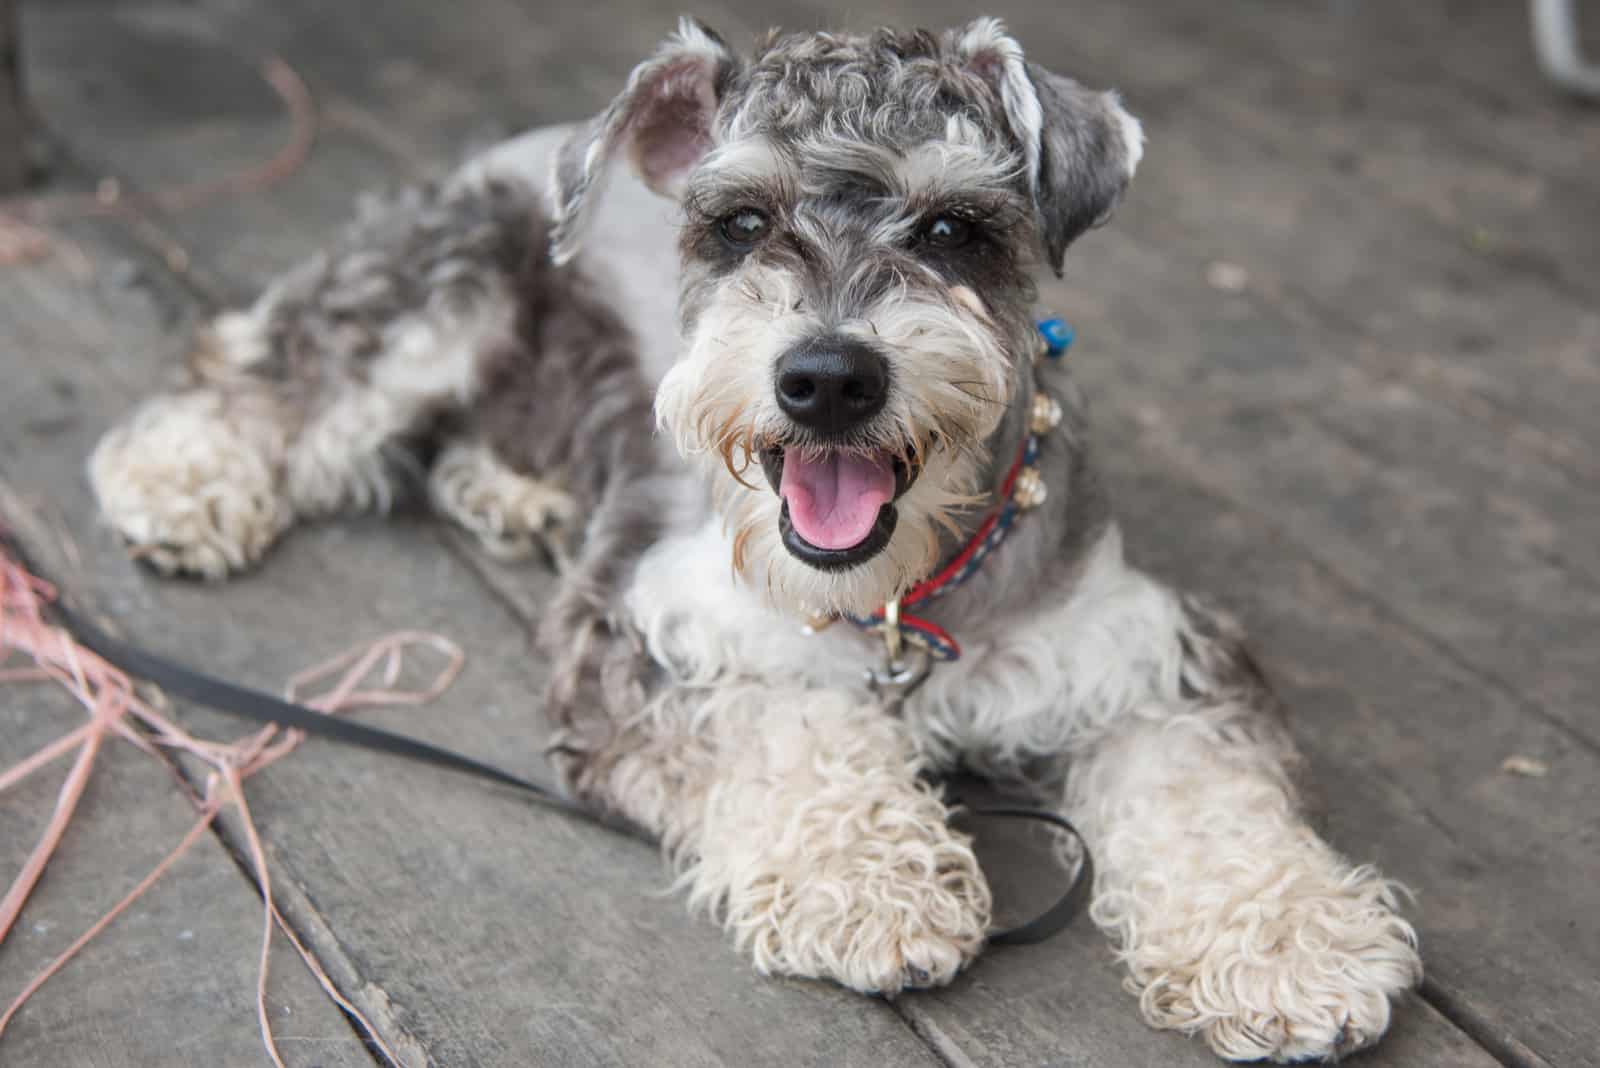 Schnauzer dog with the colorful collar lies on the wooden floor